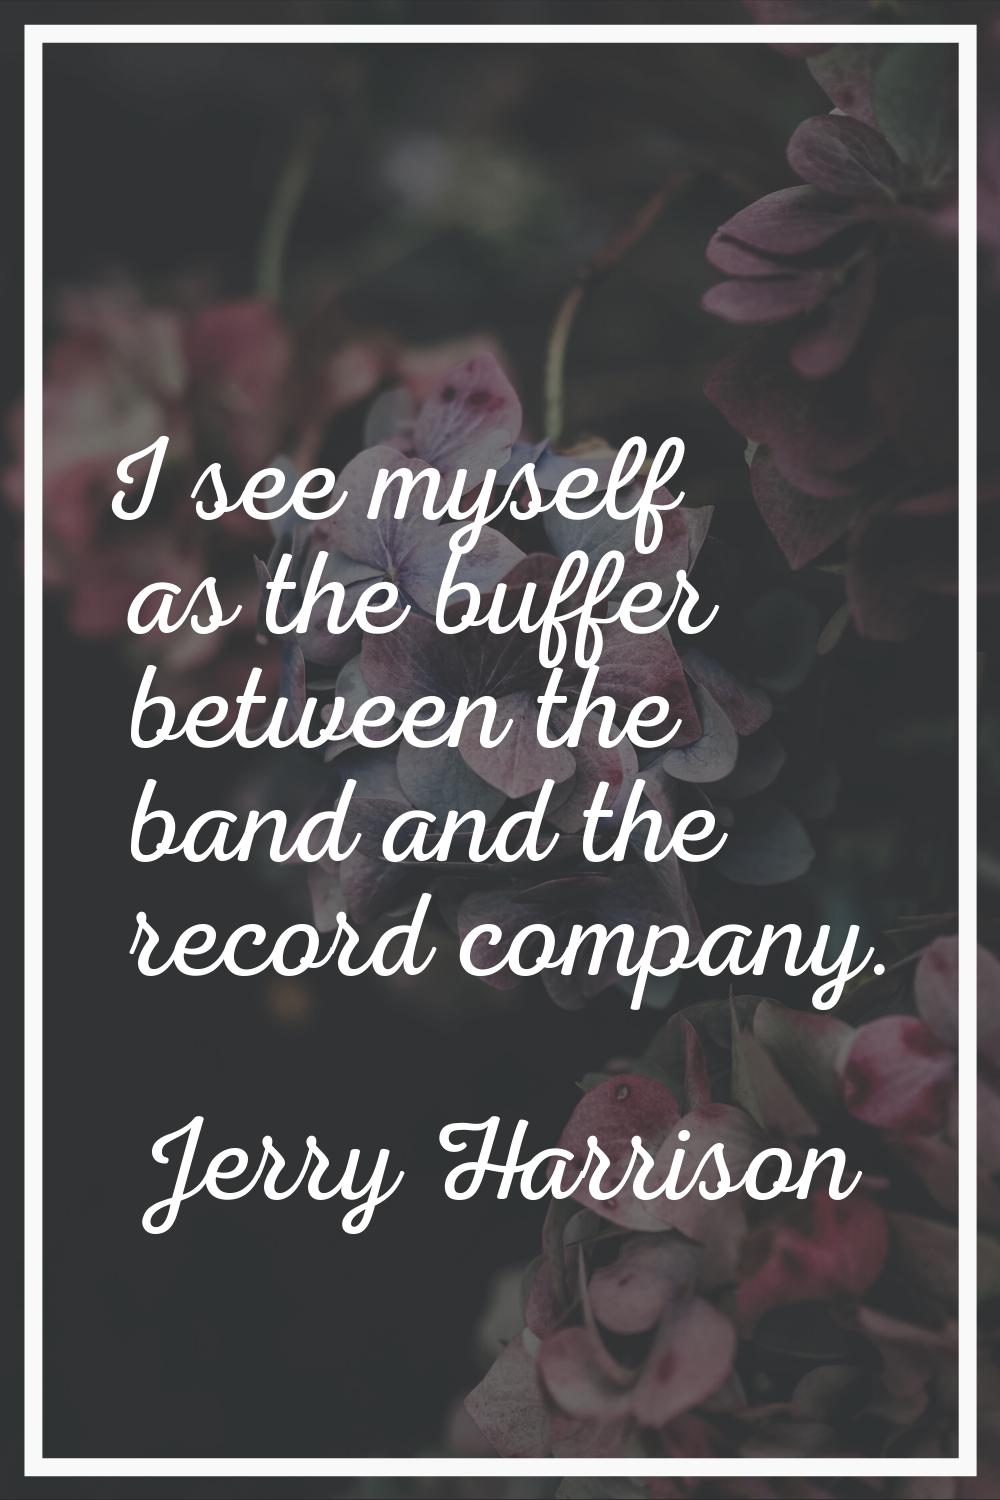 I see myself as the buffer between the band and the record company.